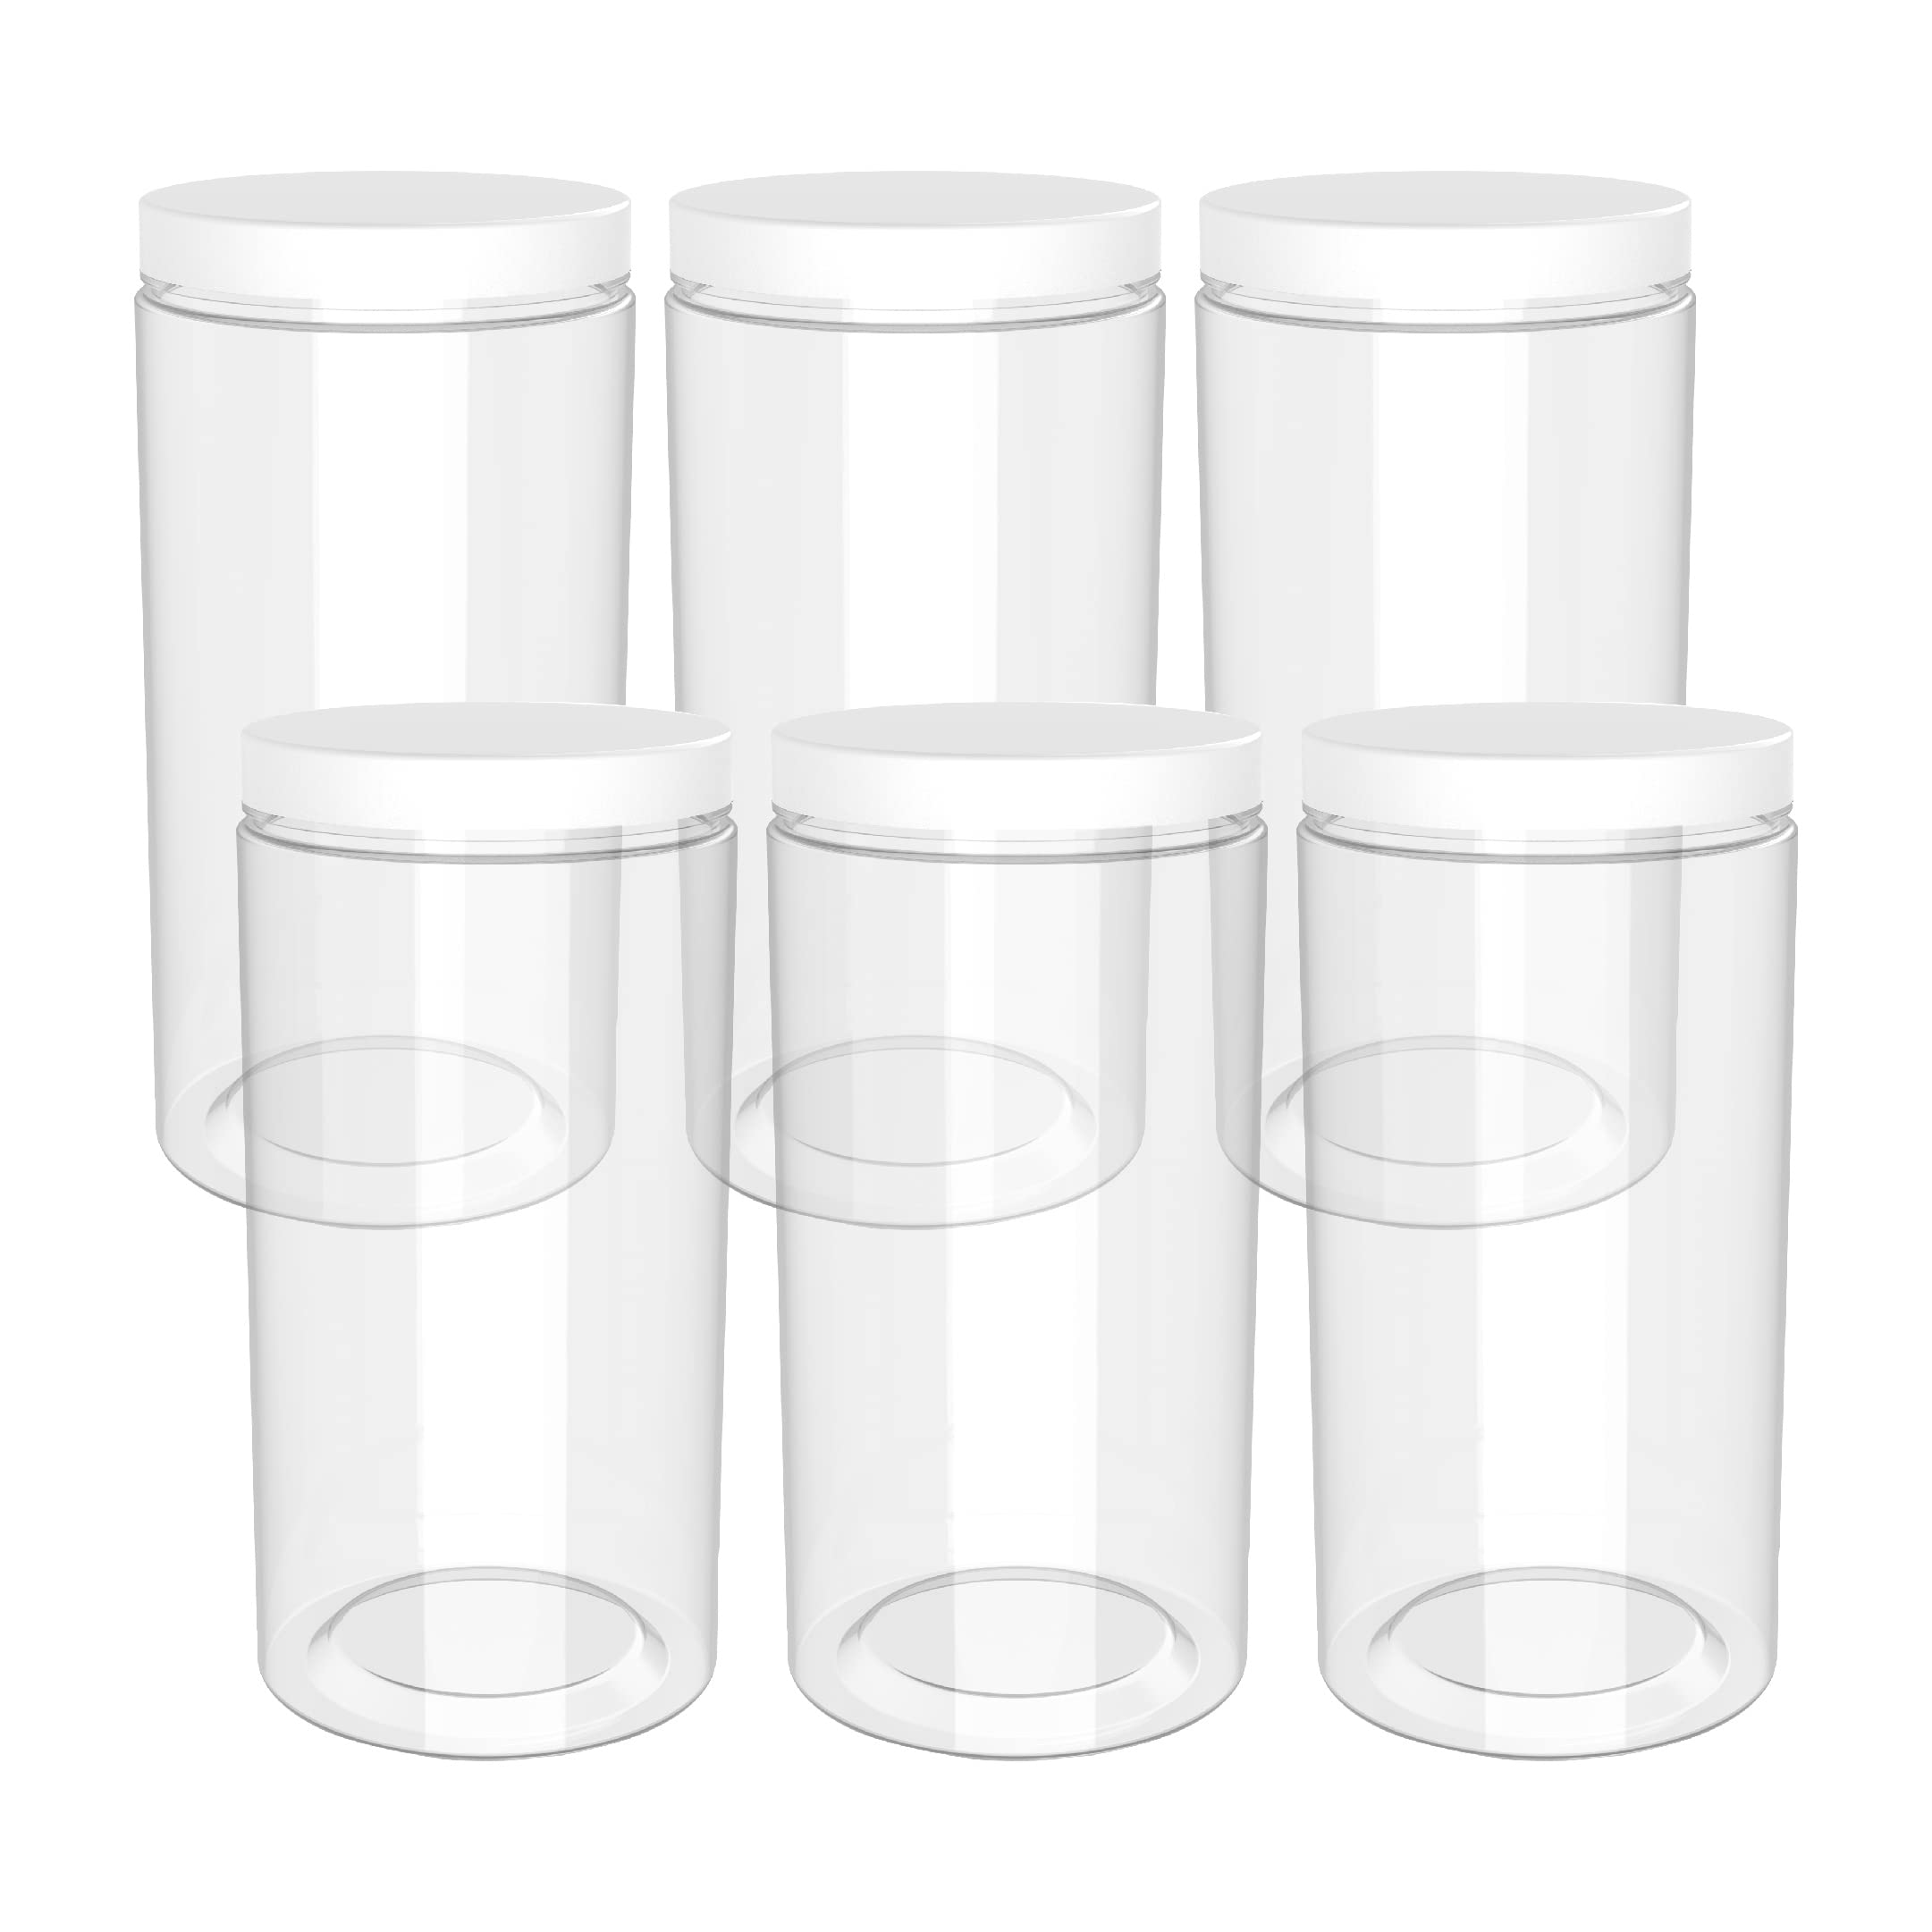 HoleviFO 48oz (1420 ml, 6 Pack) Clear Tall Plastic Jars with Smooth White Lids and Labels, Cylindrical Food Storage BPA Free PET Quart Size Canisters for Home & Kitchen Pantry Organization and Storage